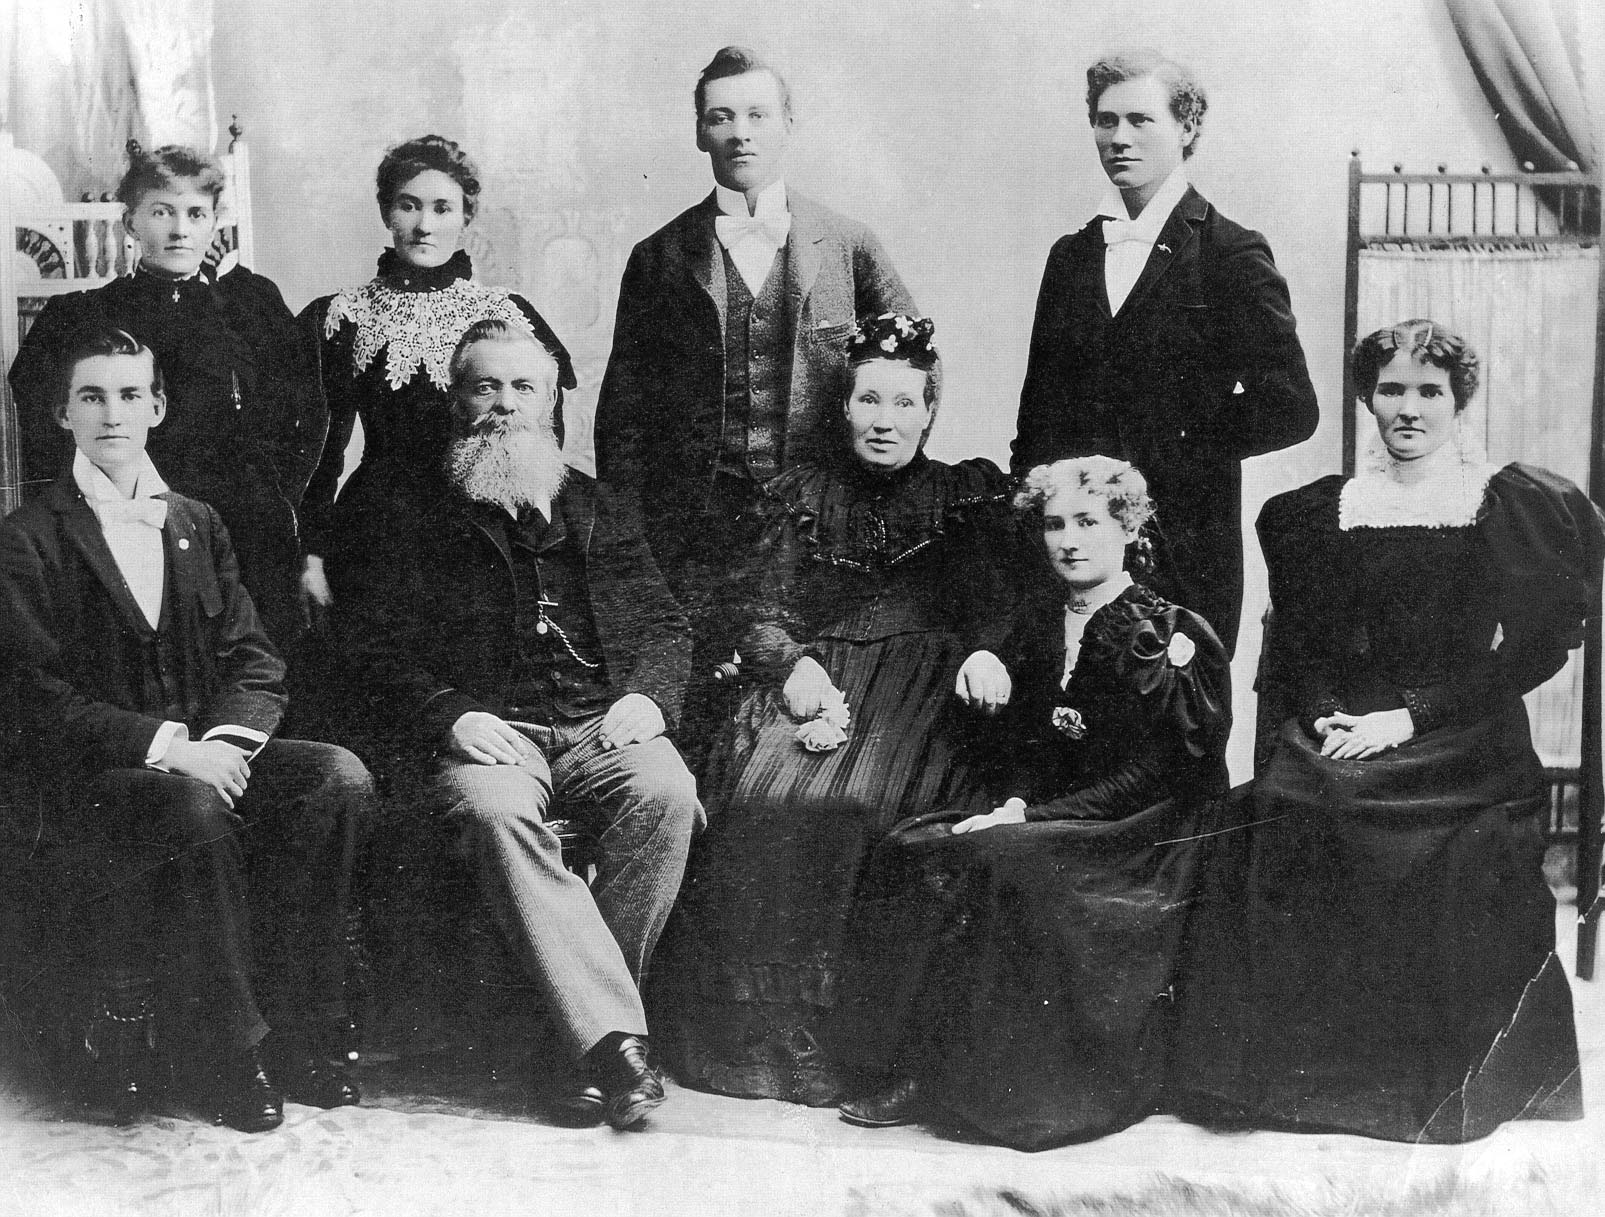 Nine members of the McConnell family posing for a family portrait. The women are wearing long long dresses with puffy sleeves, the men are in suits, vests and bowties.